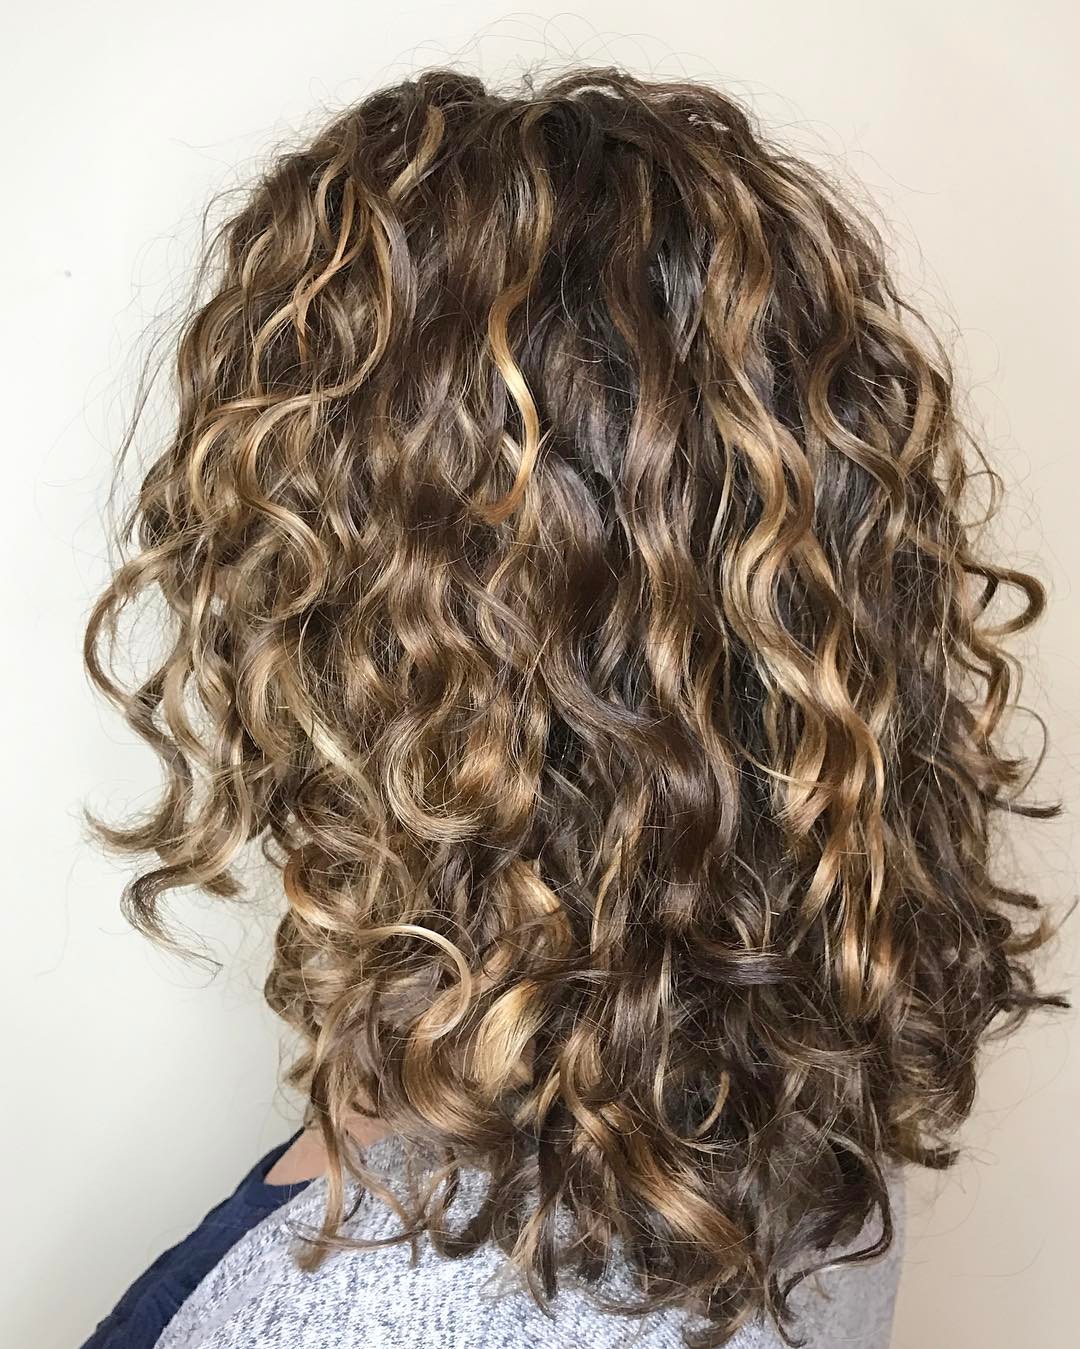 Curly Brown Hair with Dark Blonde Highlights